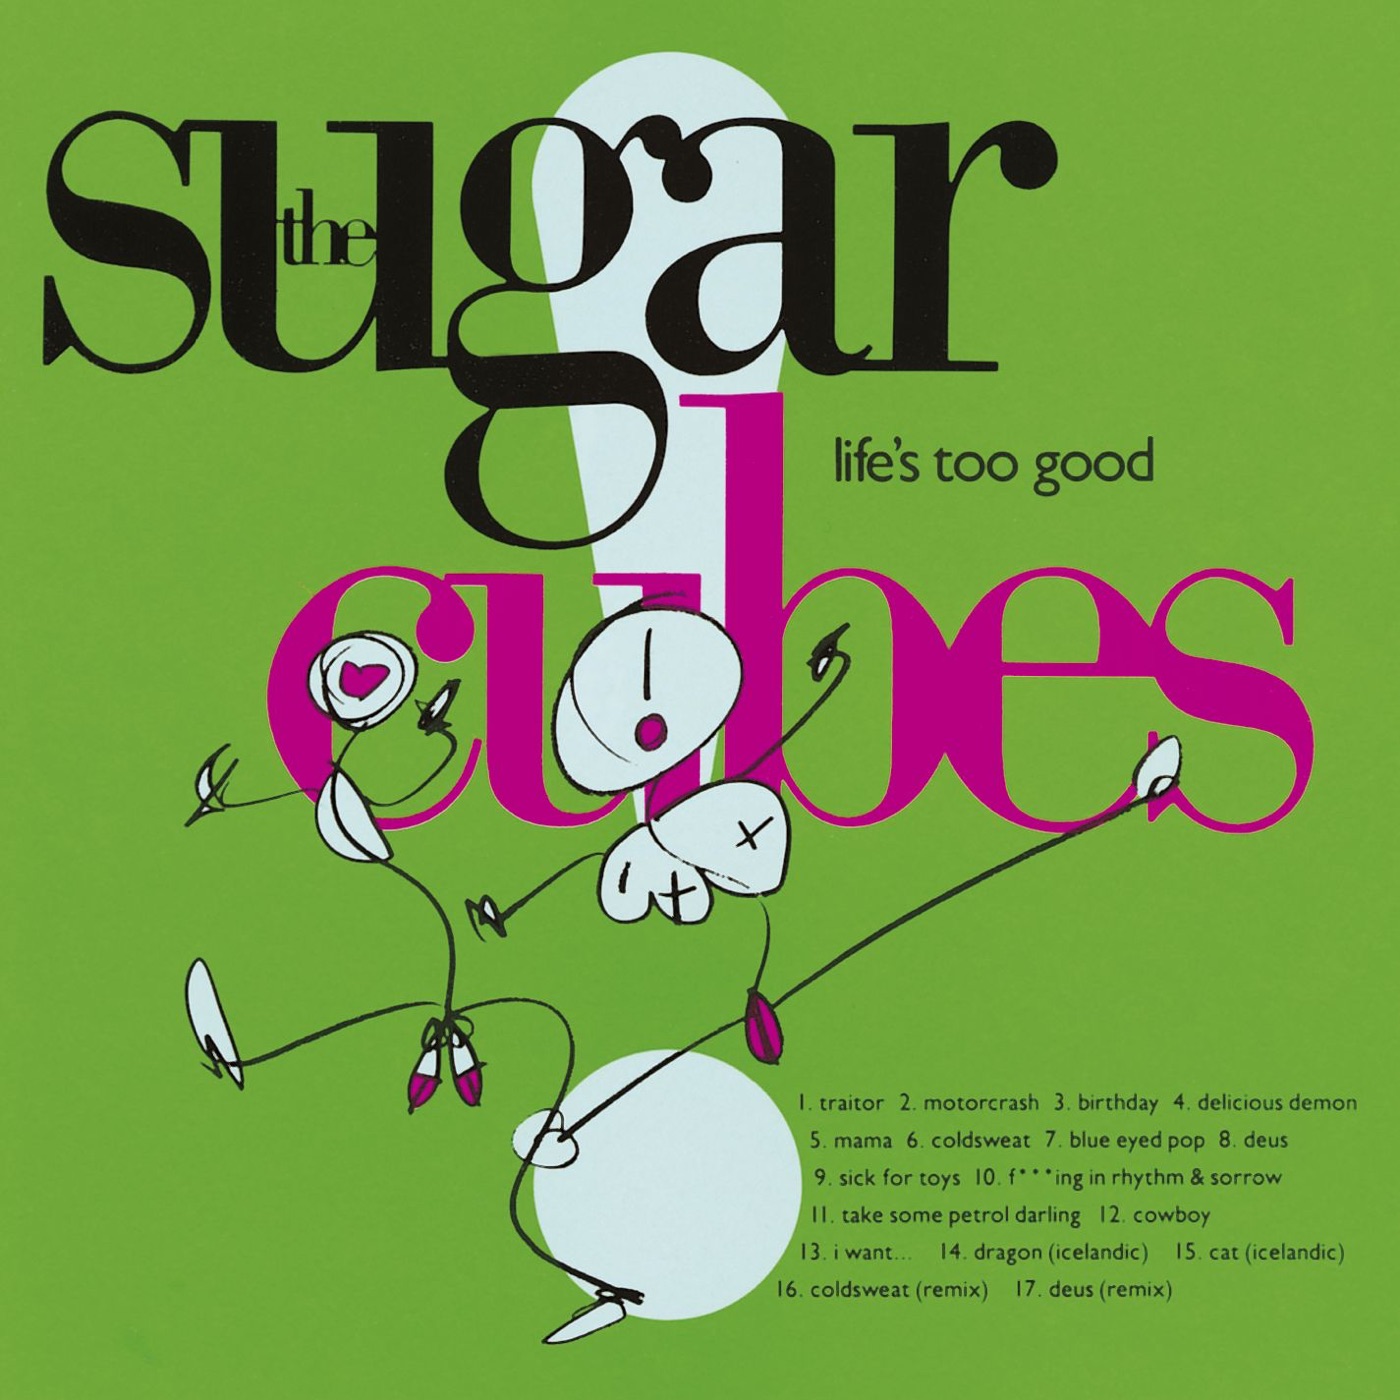 Life's Too Good by The Sugarcubes